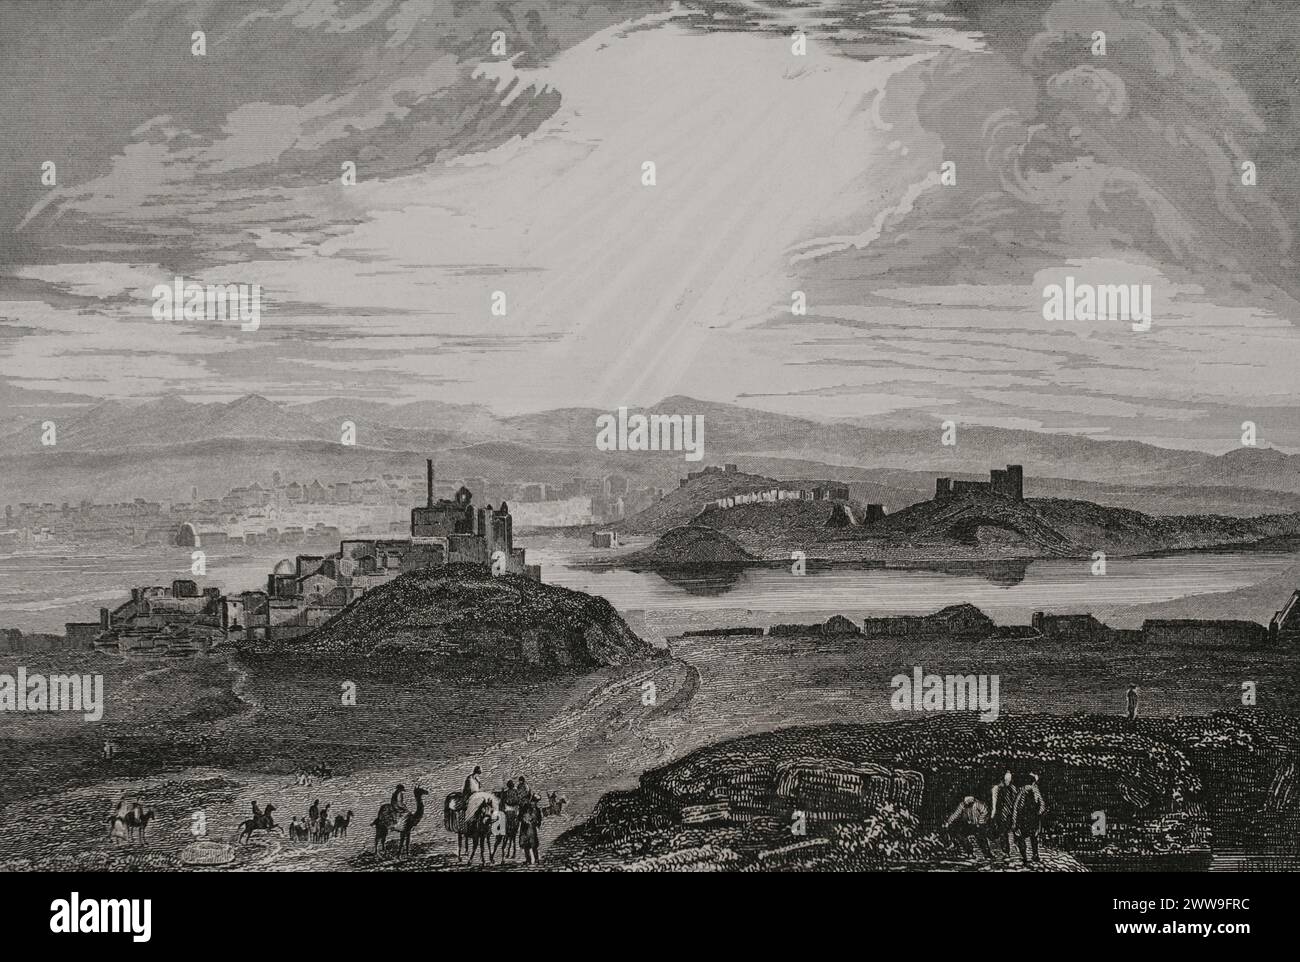 Ancient Mesopotamia. Nineveh (near the present-day Mosul, Iraq). Panoramic view of the city alongside the Tigris River. Engraving by Aubert. 'La Tierra Santa y los lugares recorridos por los profetas, por los apóstoles y por los cruzados' (The Holy Land and the sites traversed by the prophets, by the apostles and by the crusaders). Published in Barcelona by the printing house of Joaquin Verdaguer, 1840. Stock Photo